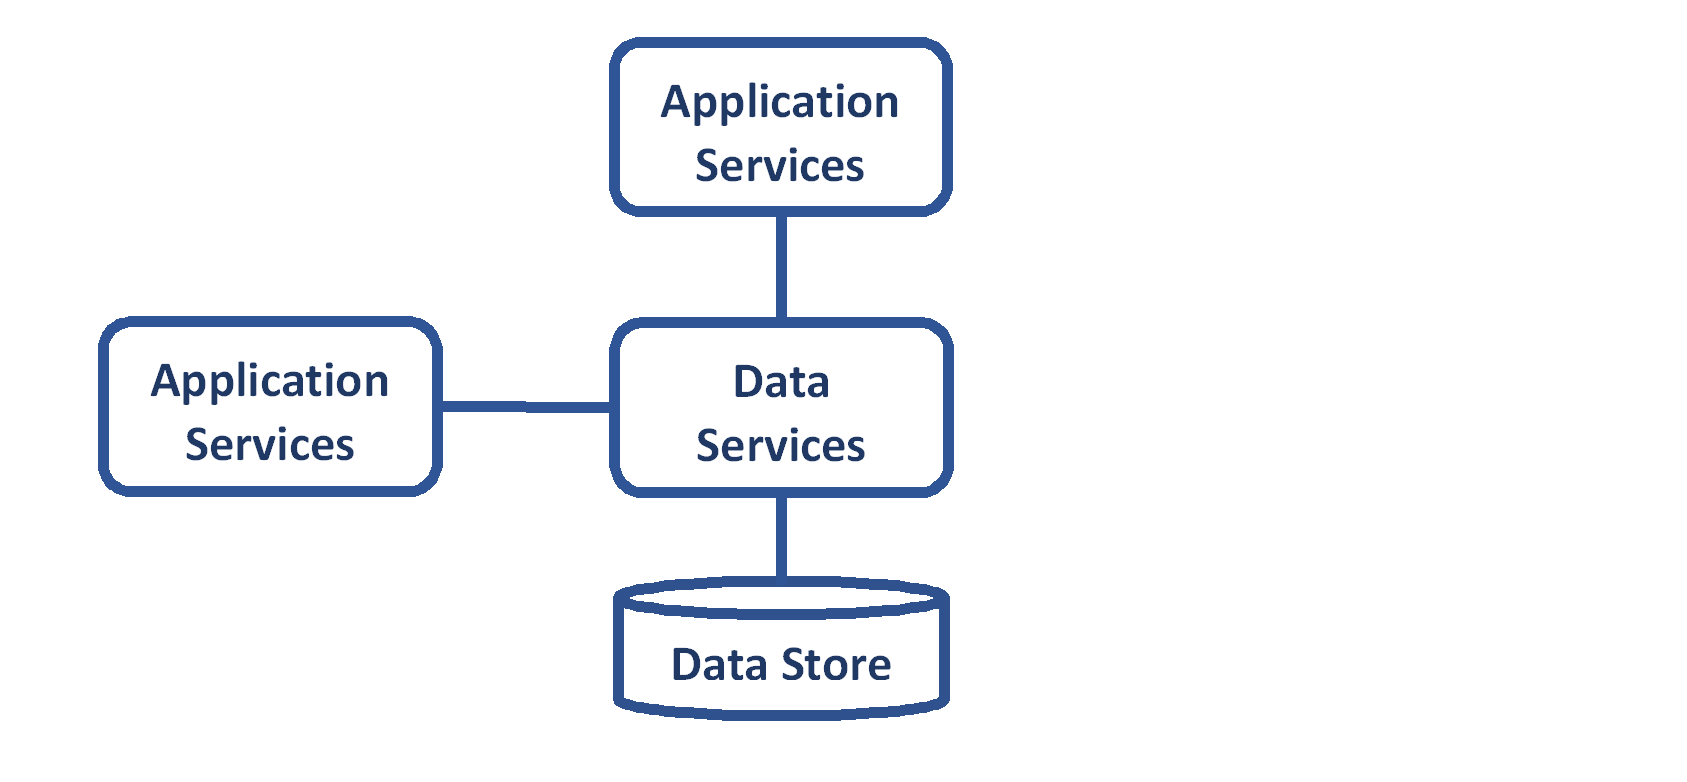 This shows how the applications reach the datat store. Image depicts two different applications connected to one data service which is connected to one data store.